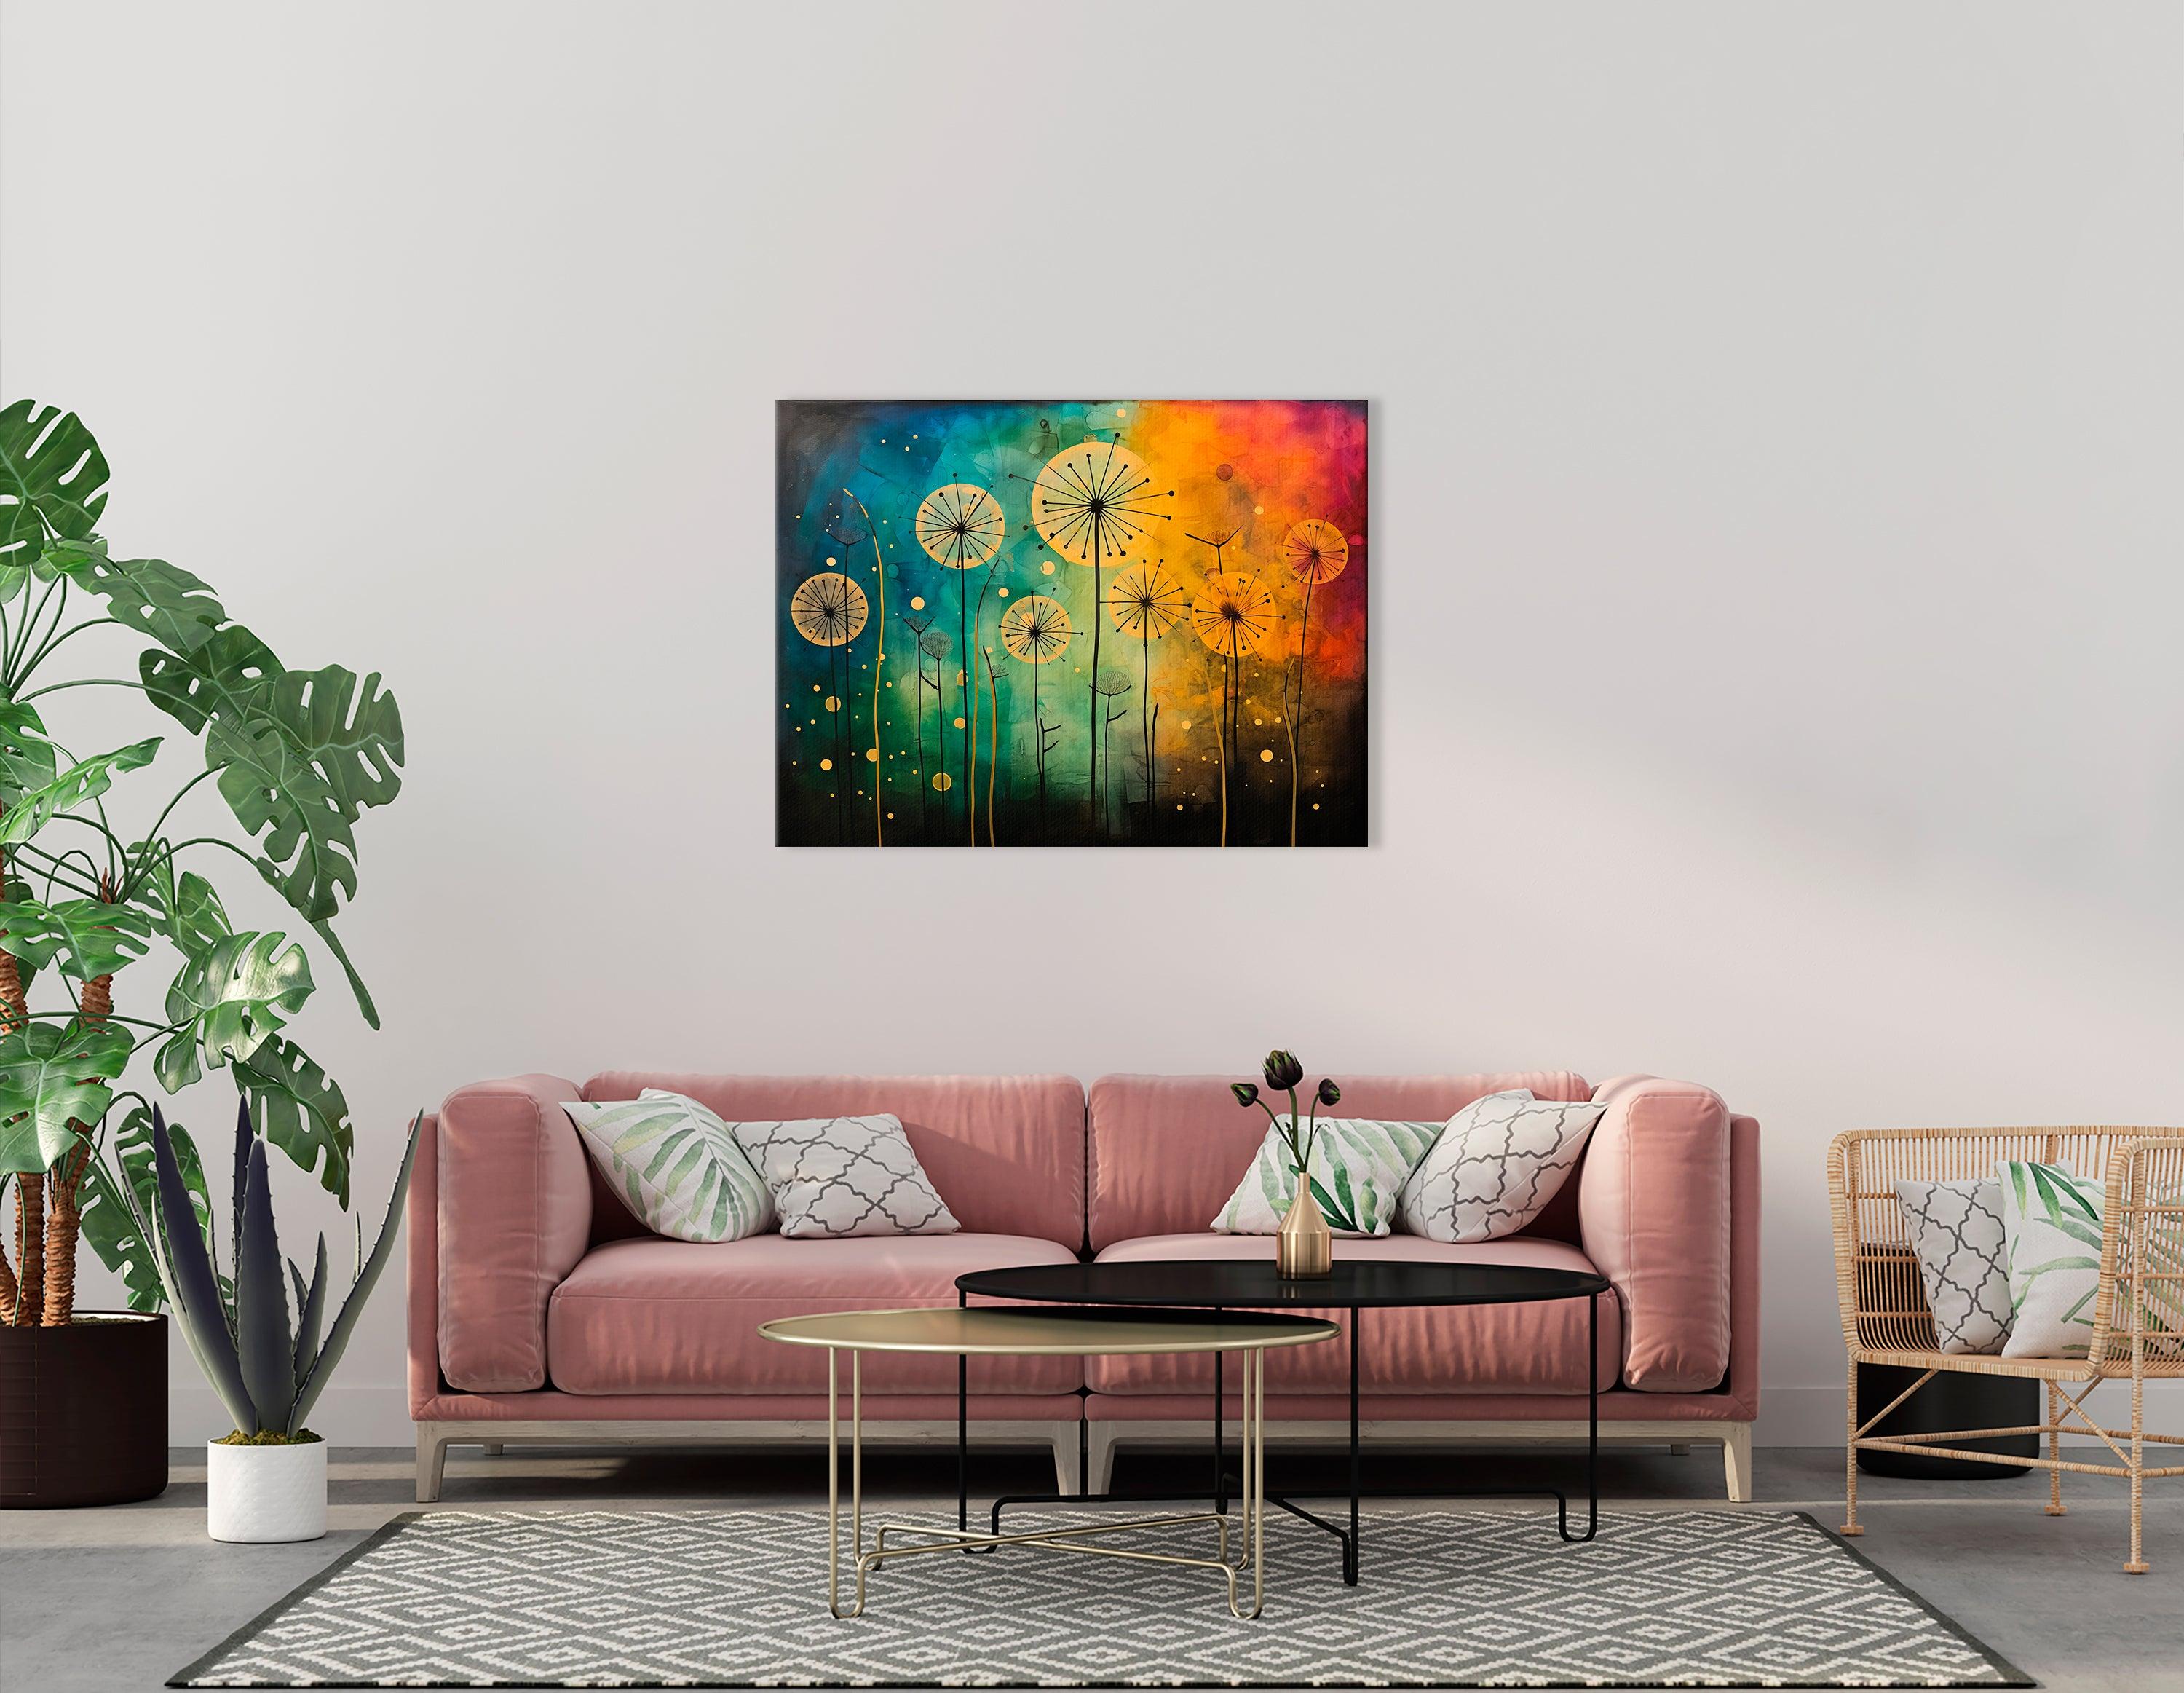 Dandelion in Colorful Hues with Golden Palette - Canvas Print - Artoholica Ready to Hang Canvas Print